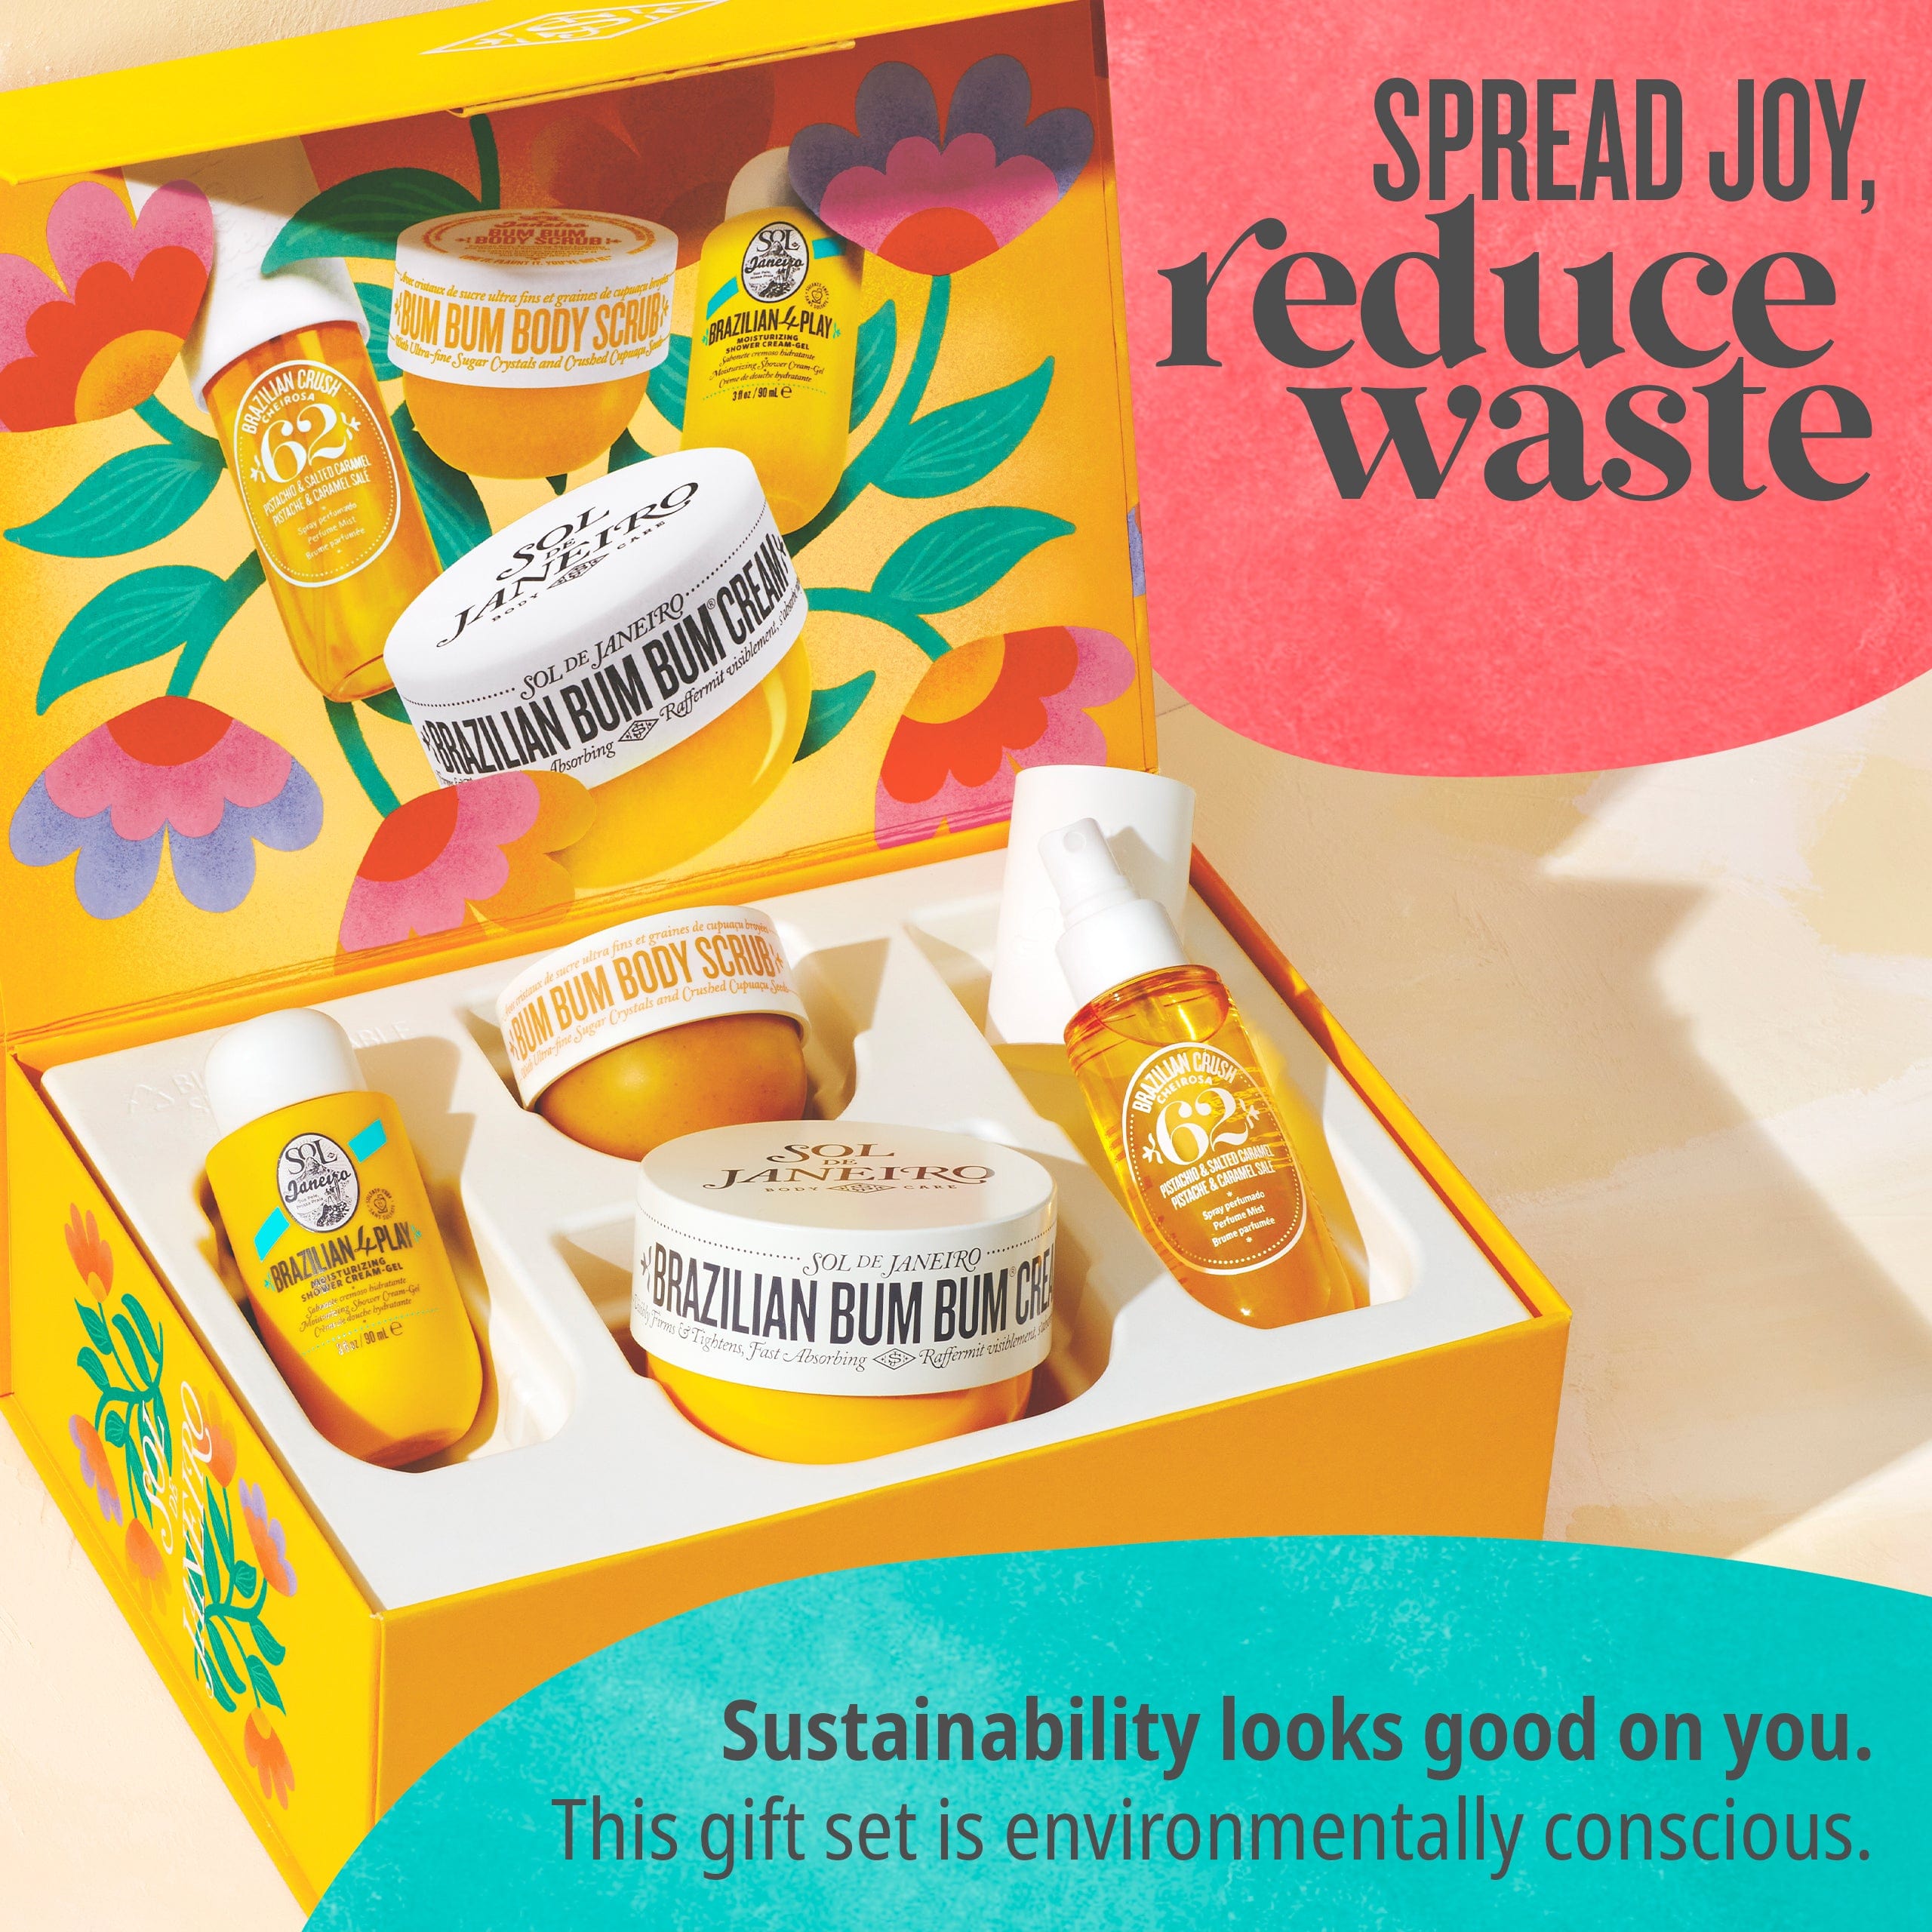 Spread joy, reduce waste. Sustainability looks good on you. This gift set is environmentally conscious.